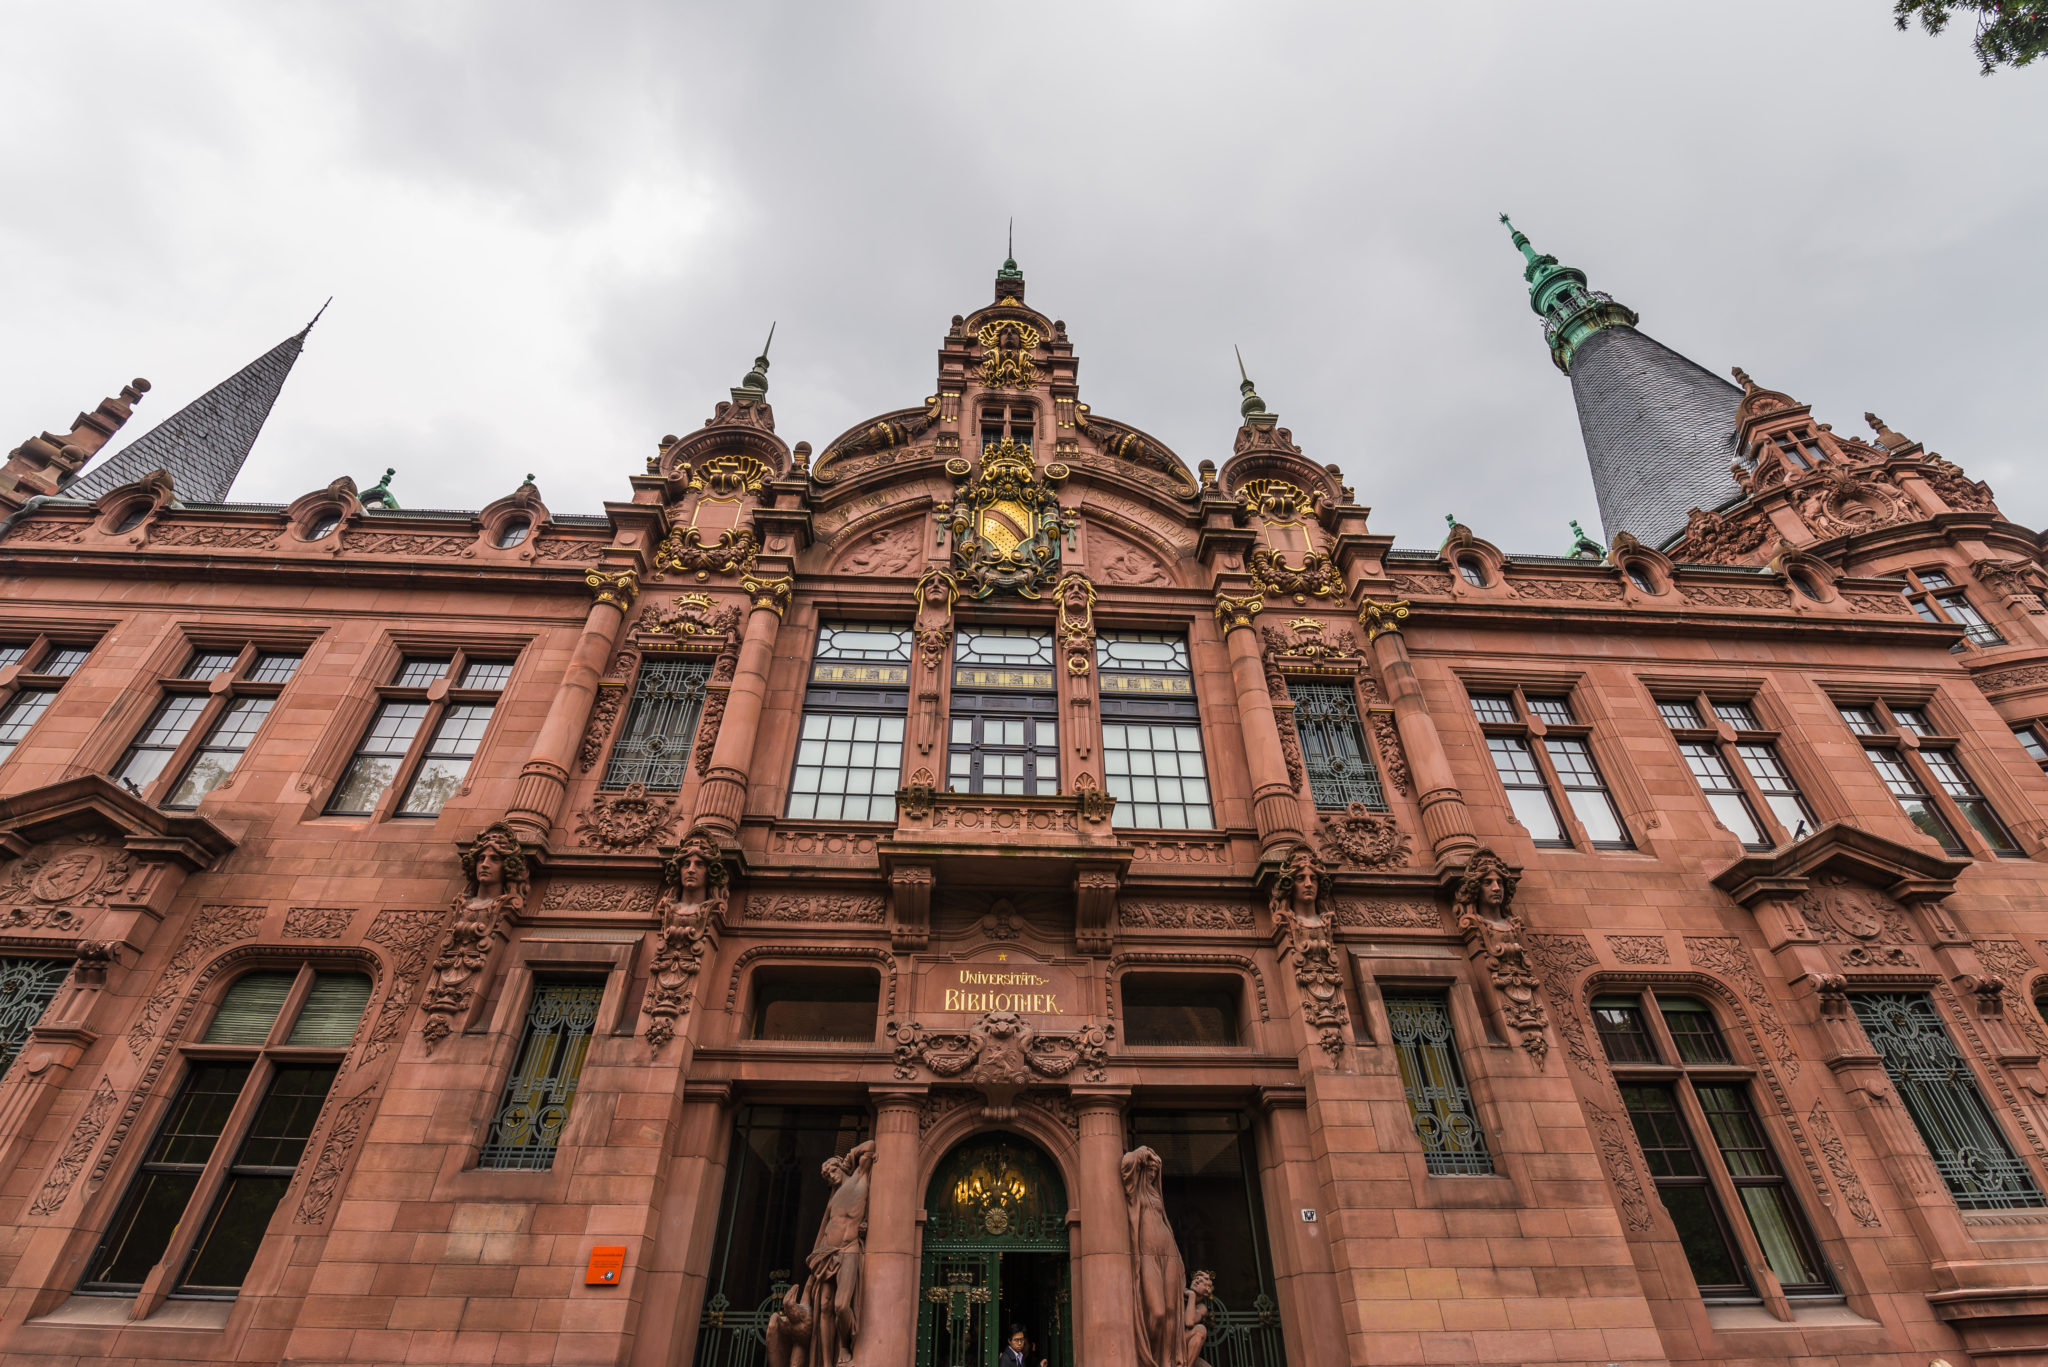 The old library of Heidelberg University is seen in October 2015.